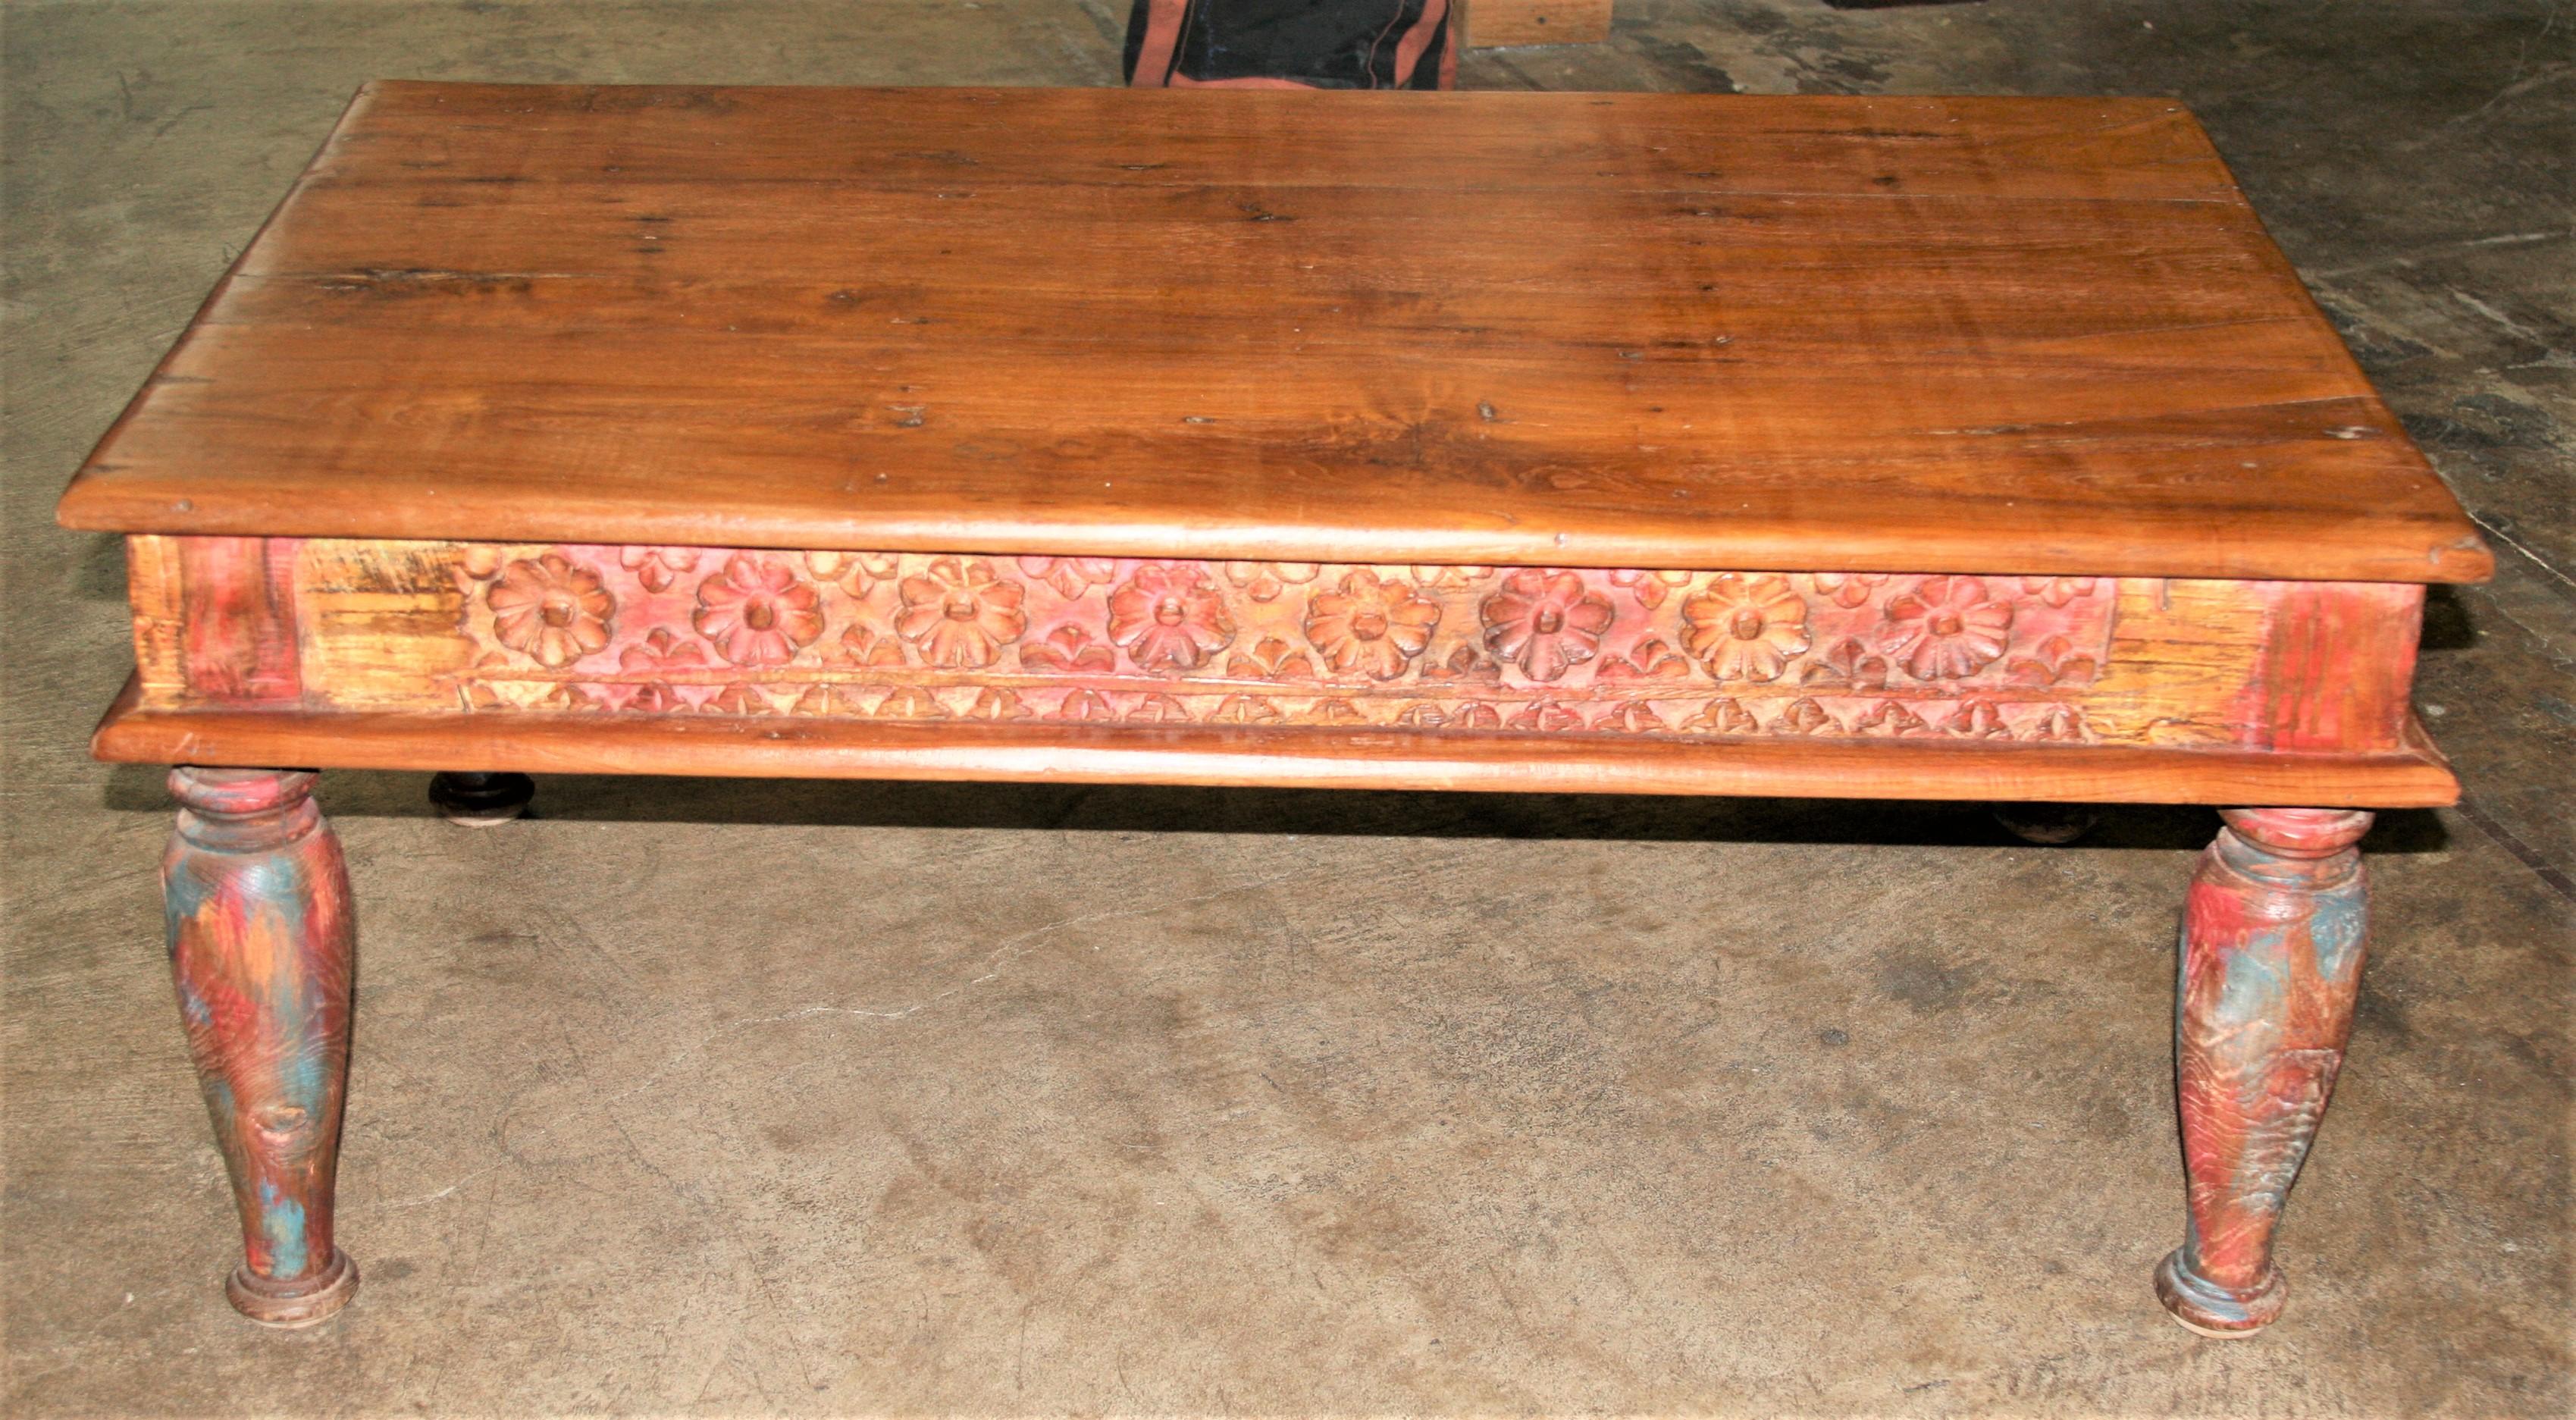 This table comes from a tea plantation owned by the British settlers in Asia in the 20th century. It is superbly crafted in the old word style with original painting still sticking in most part of the table. The sides are carved in floral design